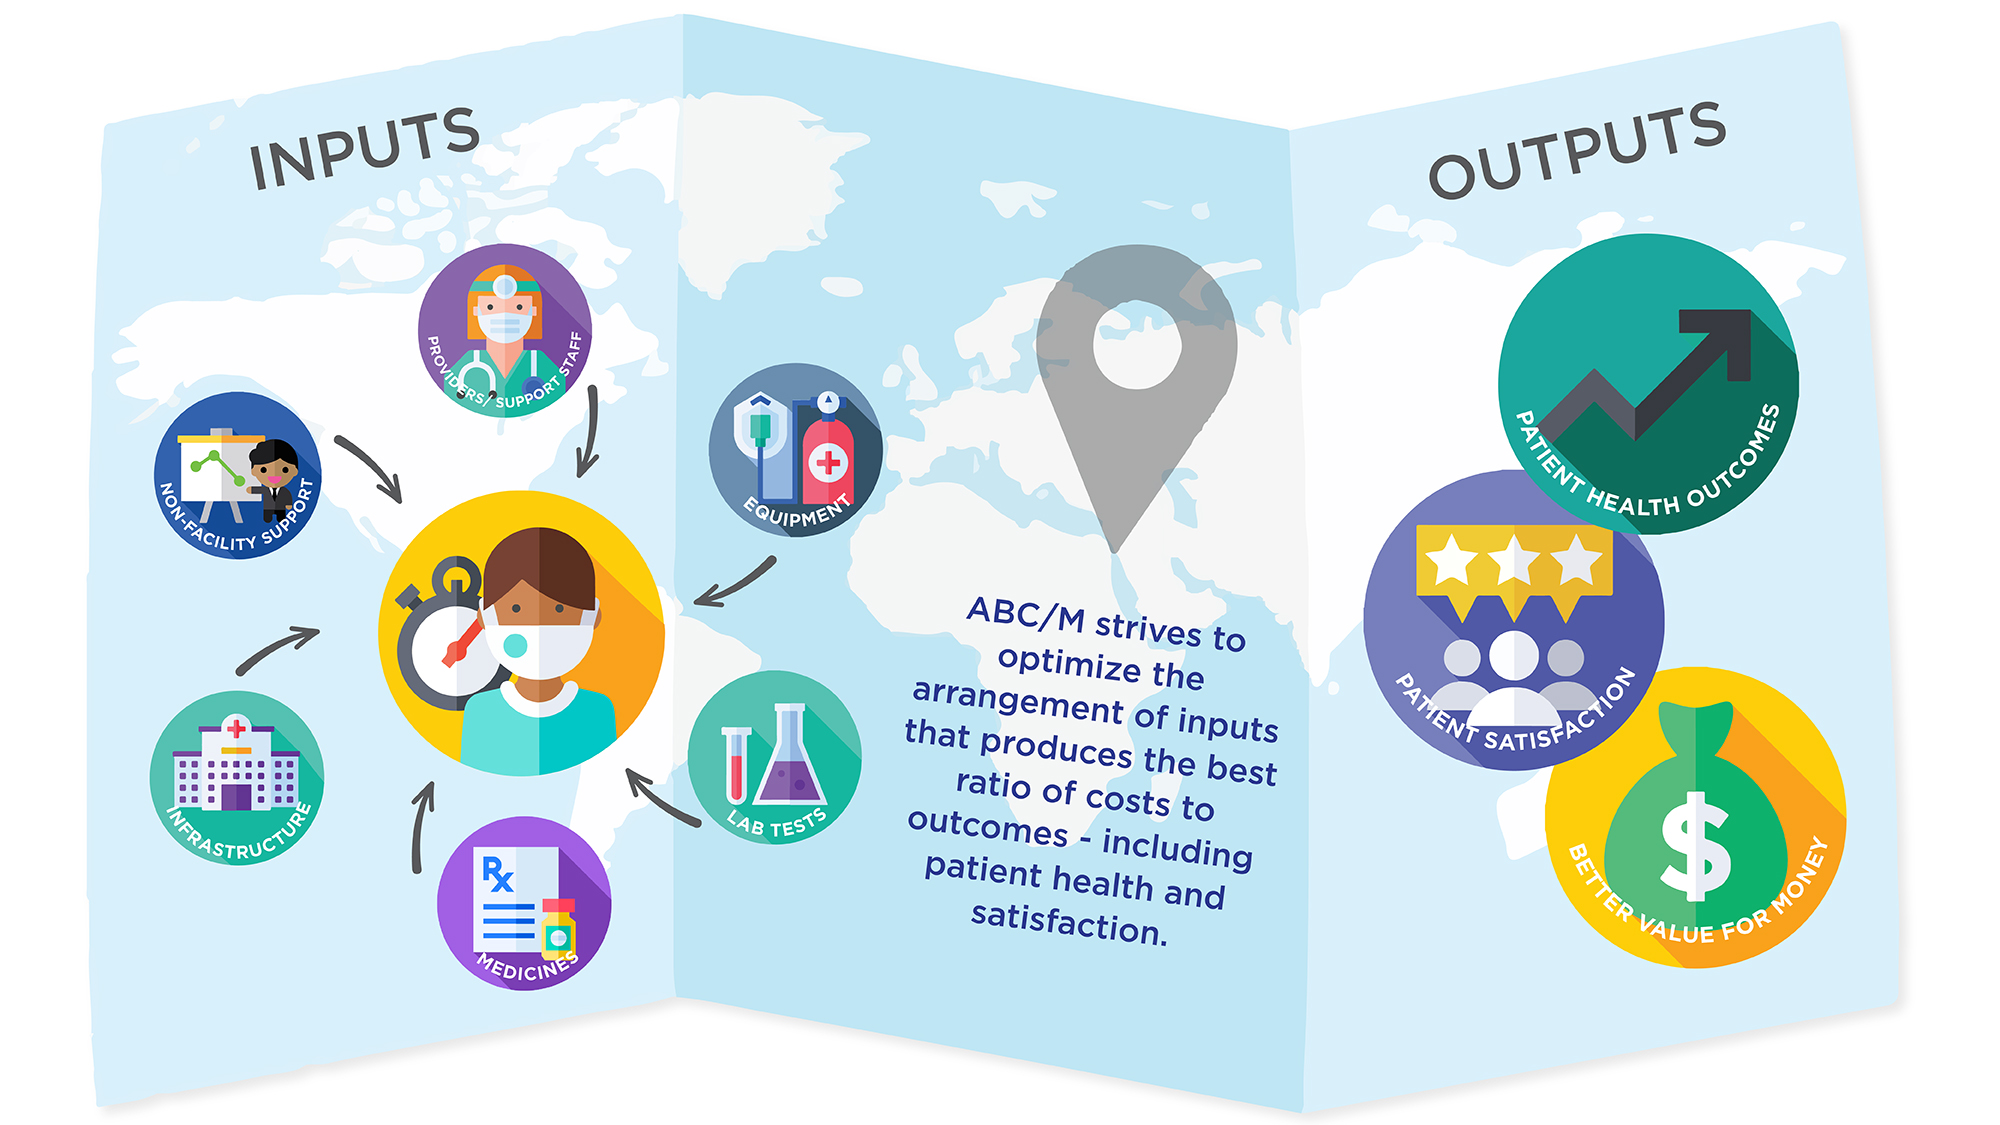 ABC/M strives to optimize the arrangement of inputs that produces the best ratio of cost to outcomes - including patient health and satisfaction.